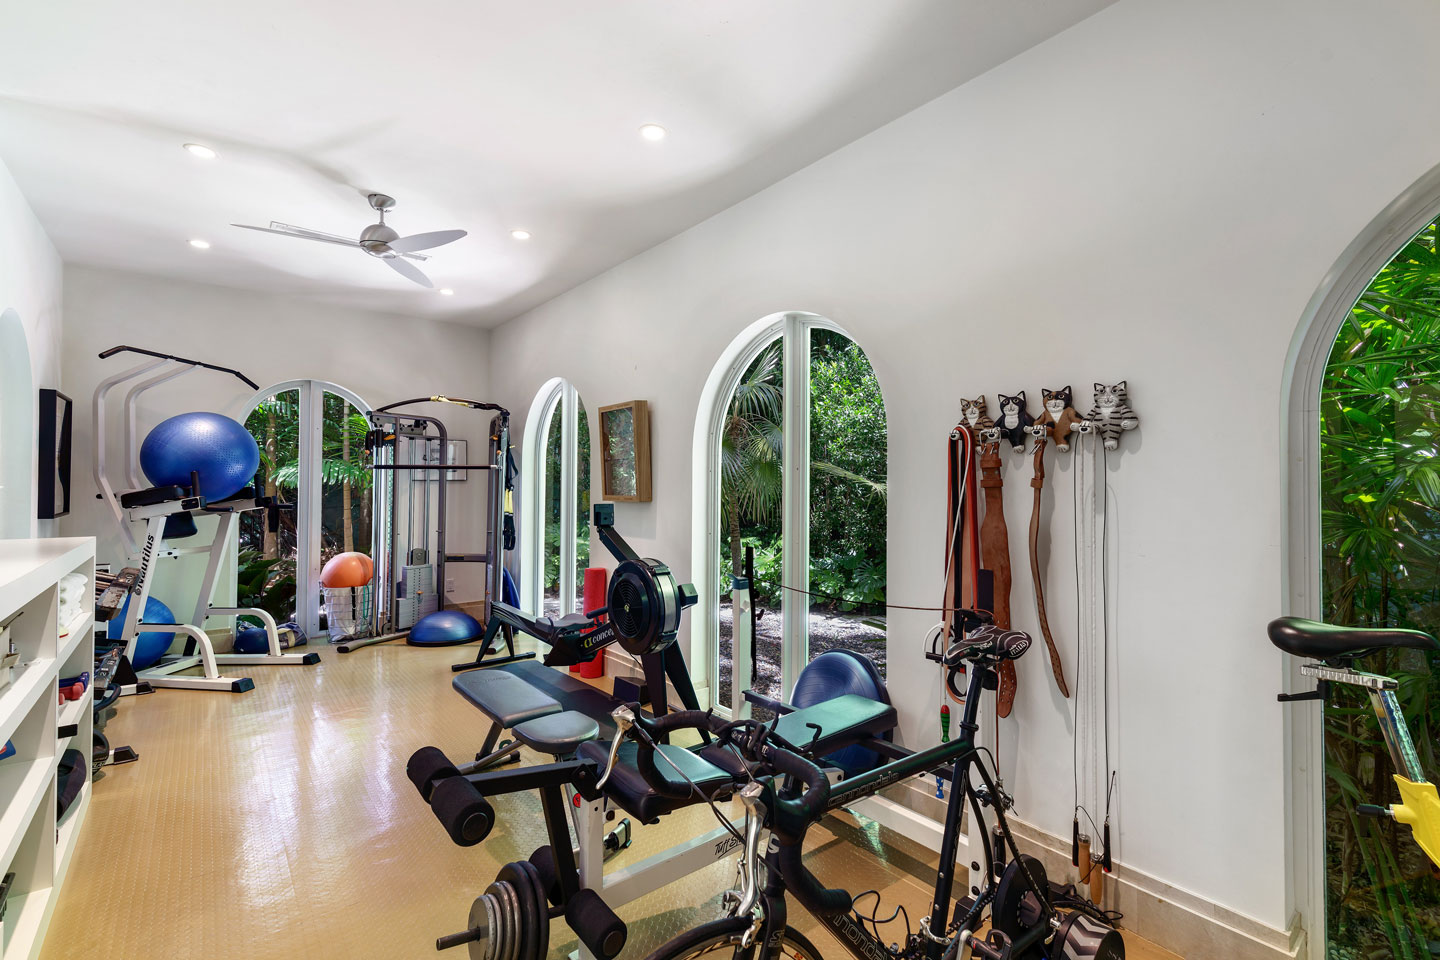 3725 Leafy Way, Coconut Grove, Miami, Florida, USA | Home Gym | Listed by Dennis Carvajal, Real Estate Agent, ONE Sotheby's International Realty | Finest Residences